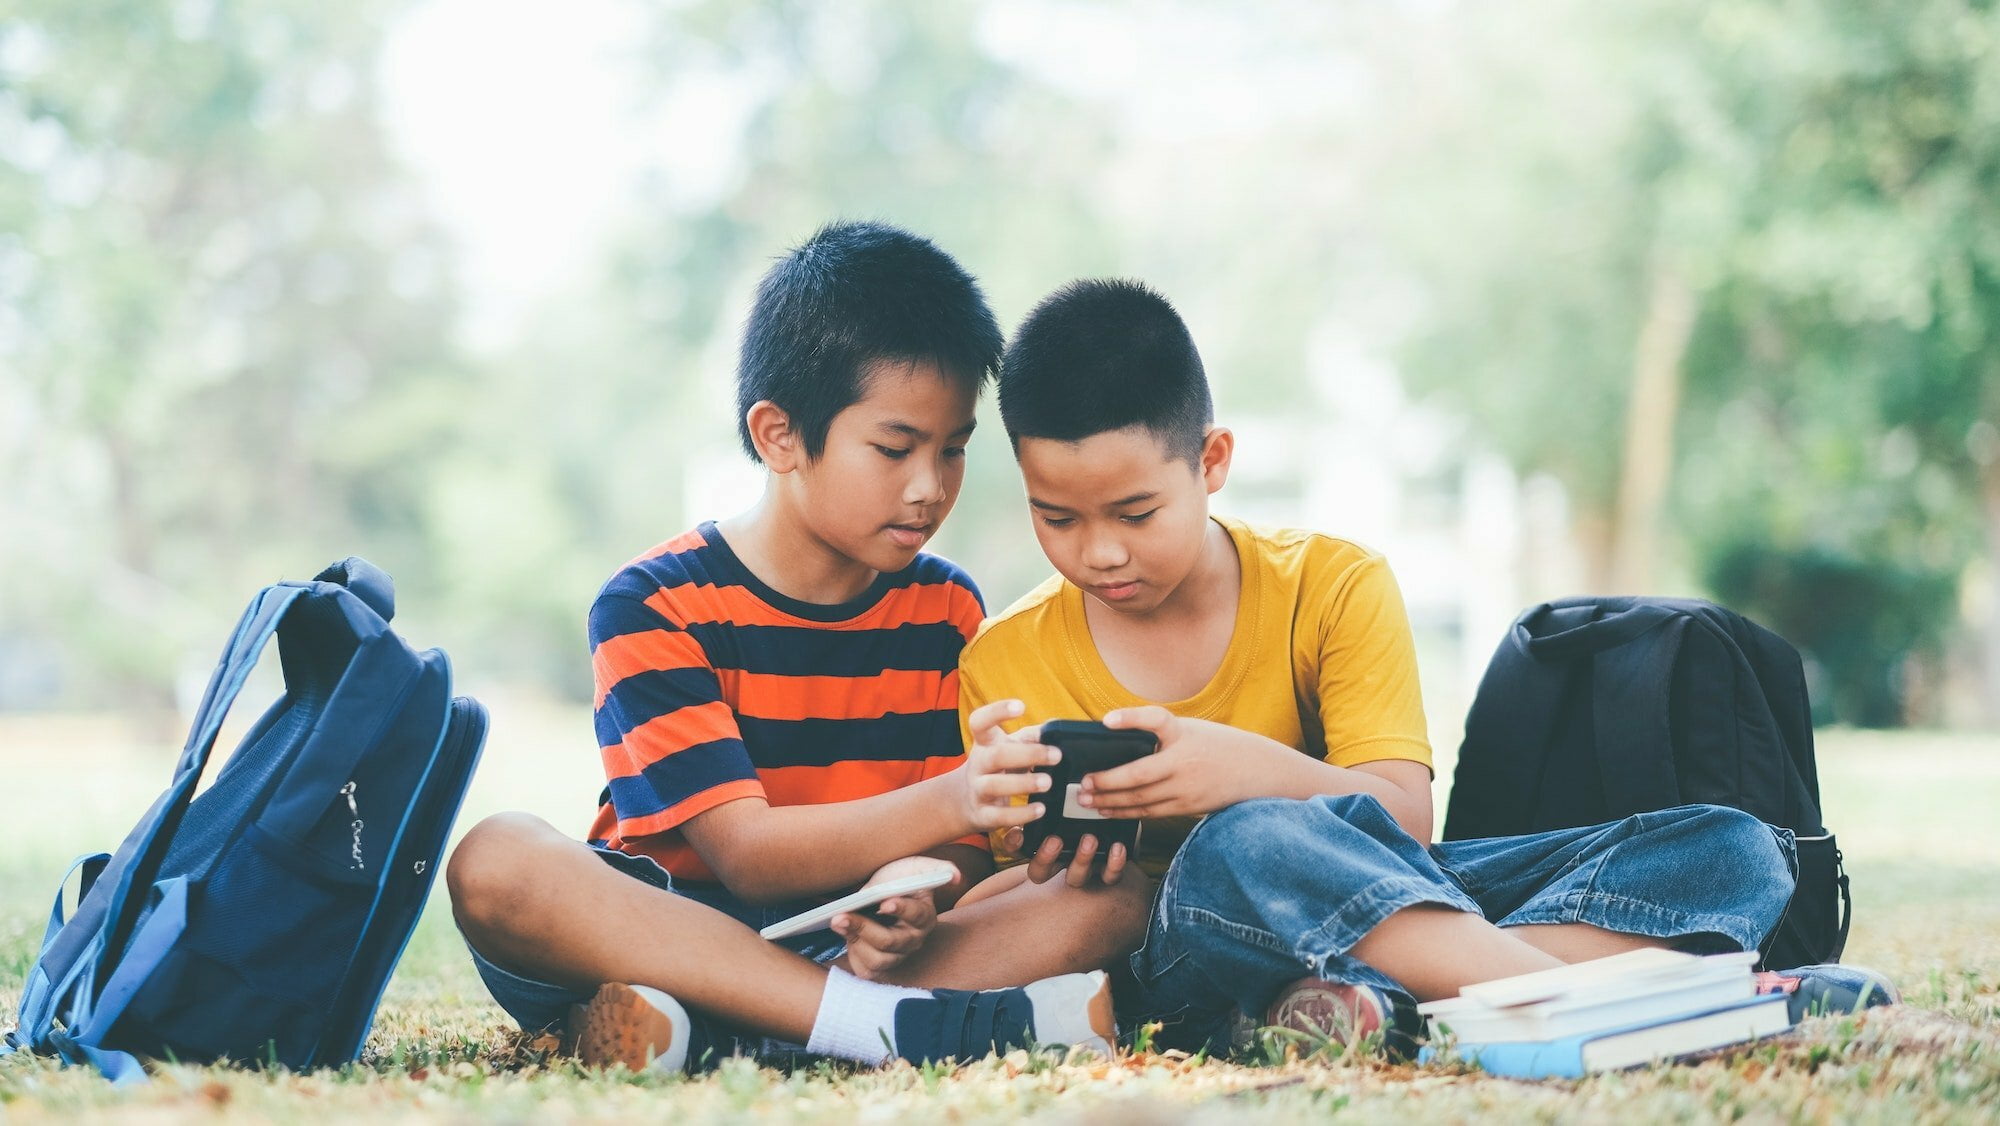 Boys play online game on smartphone